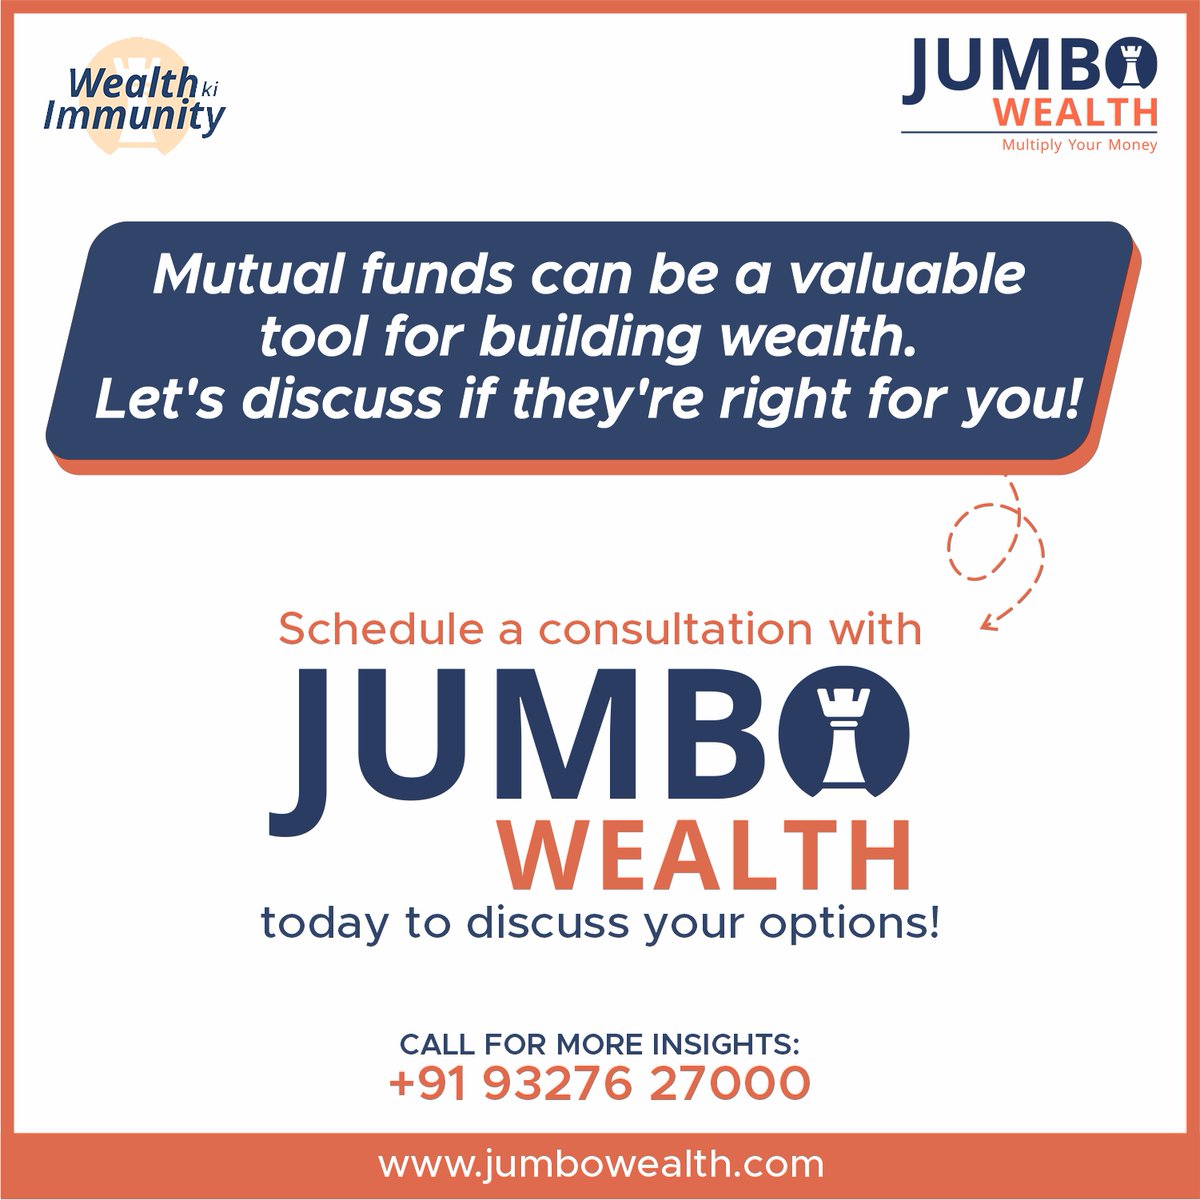 Let's understand mutual funds so that you can invest like a pro.

For more details contact Jumbo Wealth today! @9327627000

#JumboWealth #financialfreedom #financialliteracy #personalfinance #investing #moneymanagement #wealthbuilding #financetips #moneygoals #financialplanning